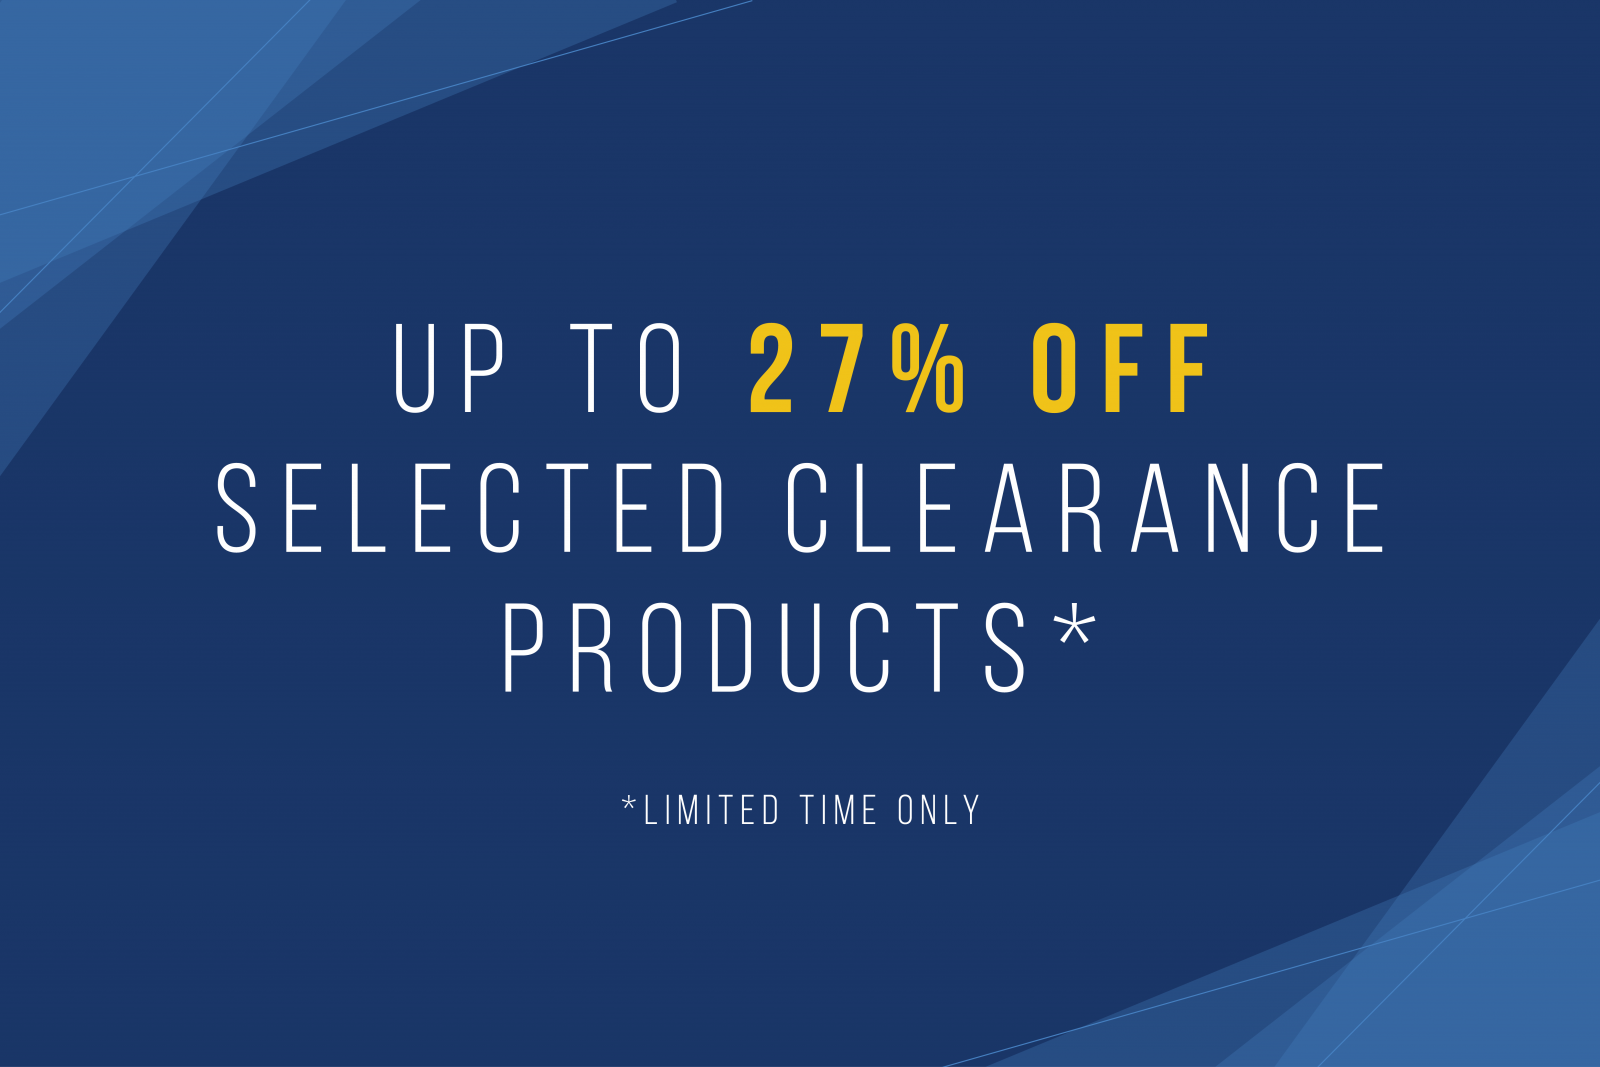 Up to 27% off selected clearance products. Limited Time Only